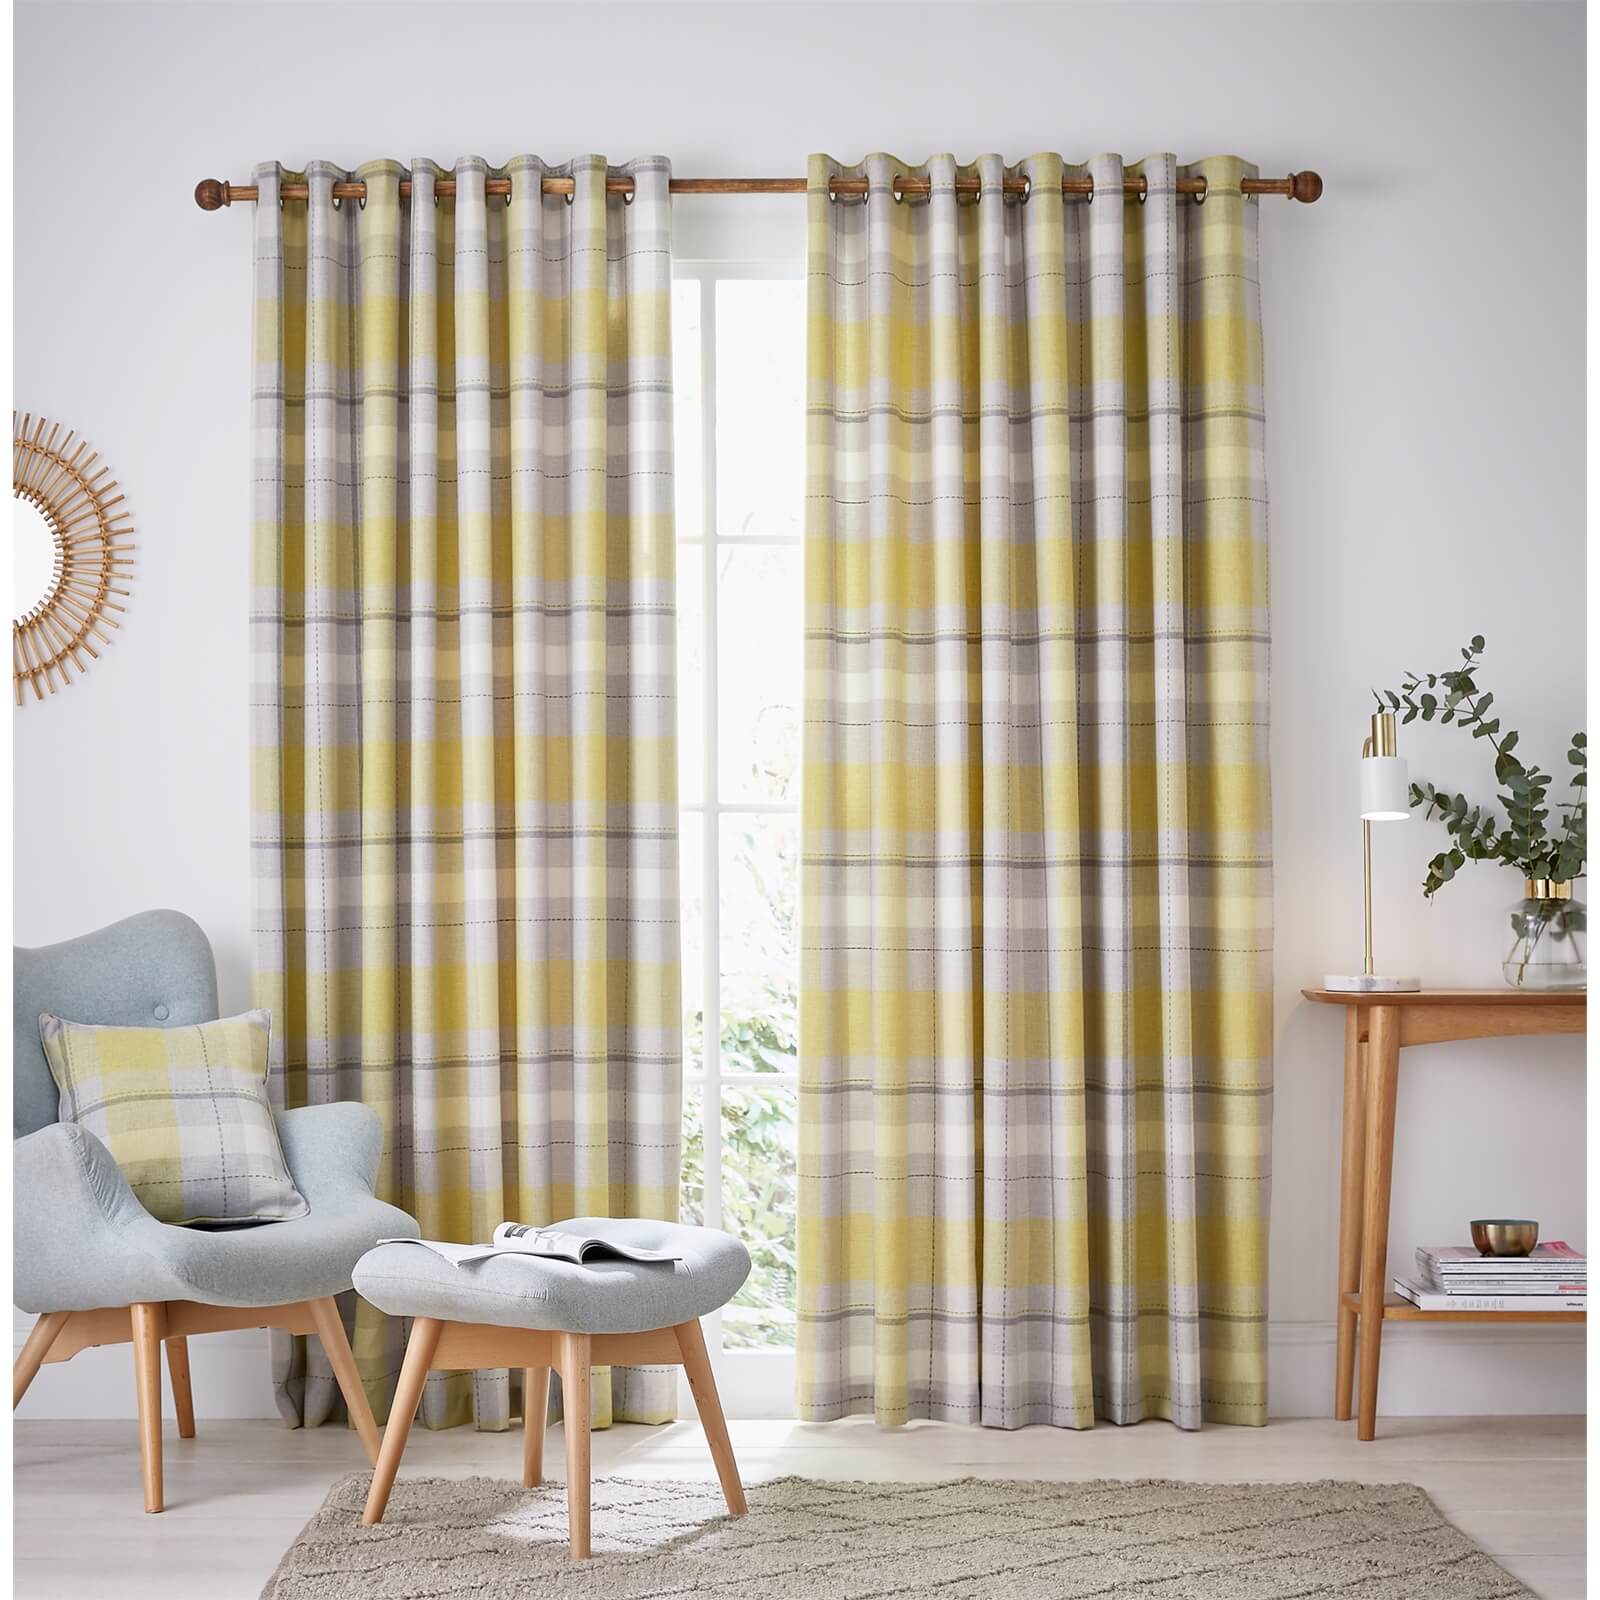 Helena Springfield Nora Lined Curtains 66 x 72 - Chartreuse